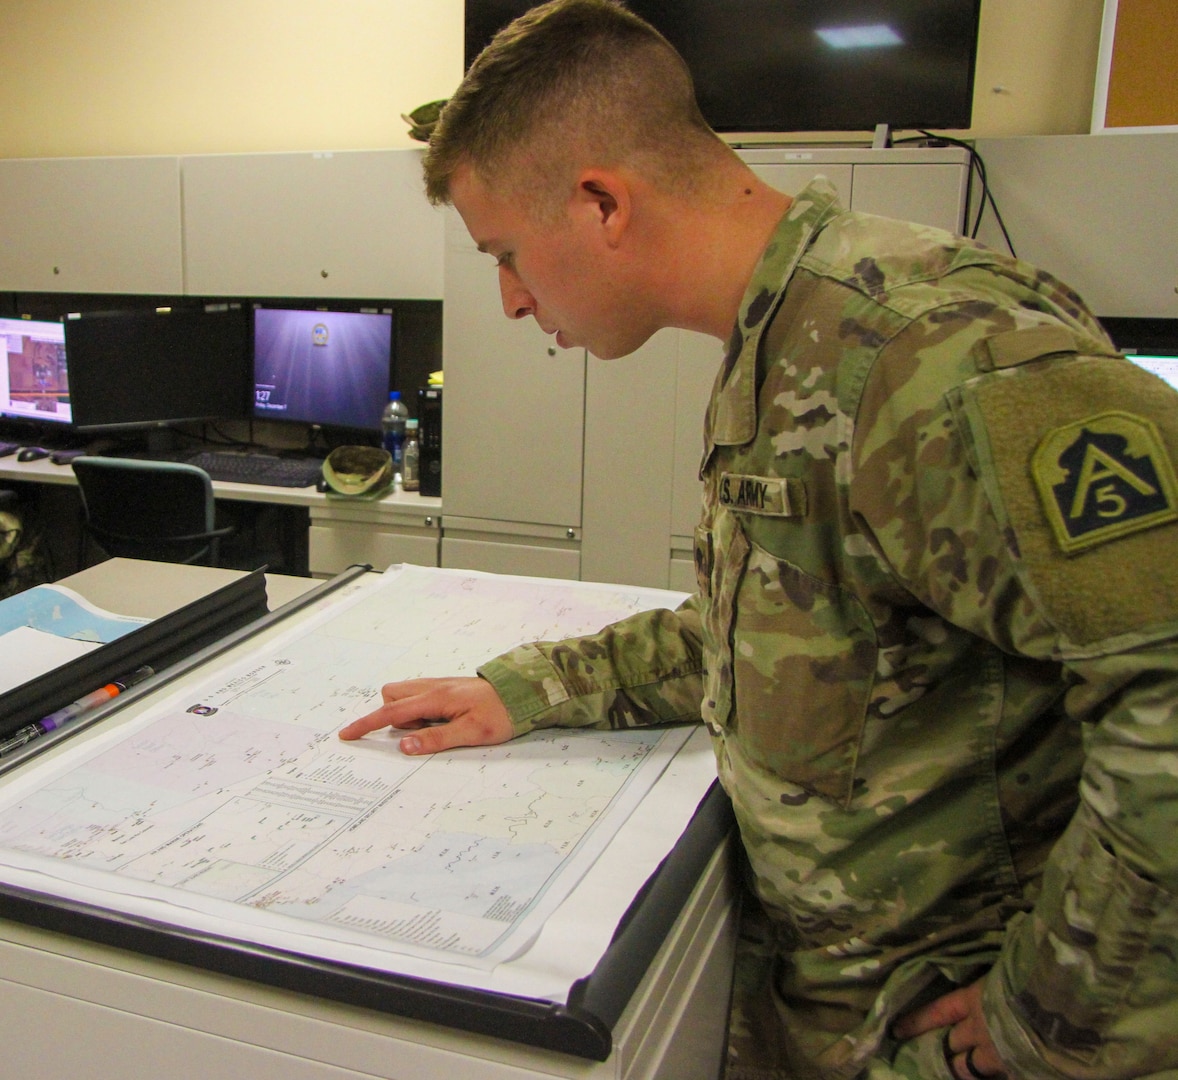 Spc. Austin T. Israel, 543rd Engineer Detachment geospatial engineer, identifies a specific point along the border from Texas to California. The detachment began their part of the border support mission by analyzing maps and refining data to paint a picture of the operating areas for commanders and decision-makers to better visualize their areas of operations.